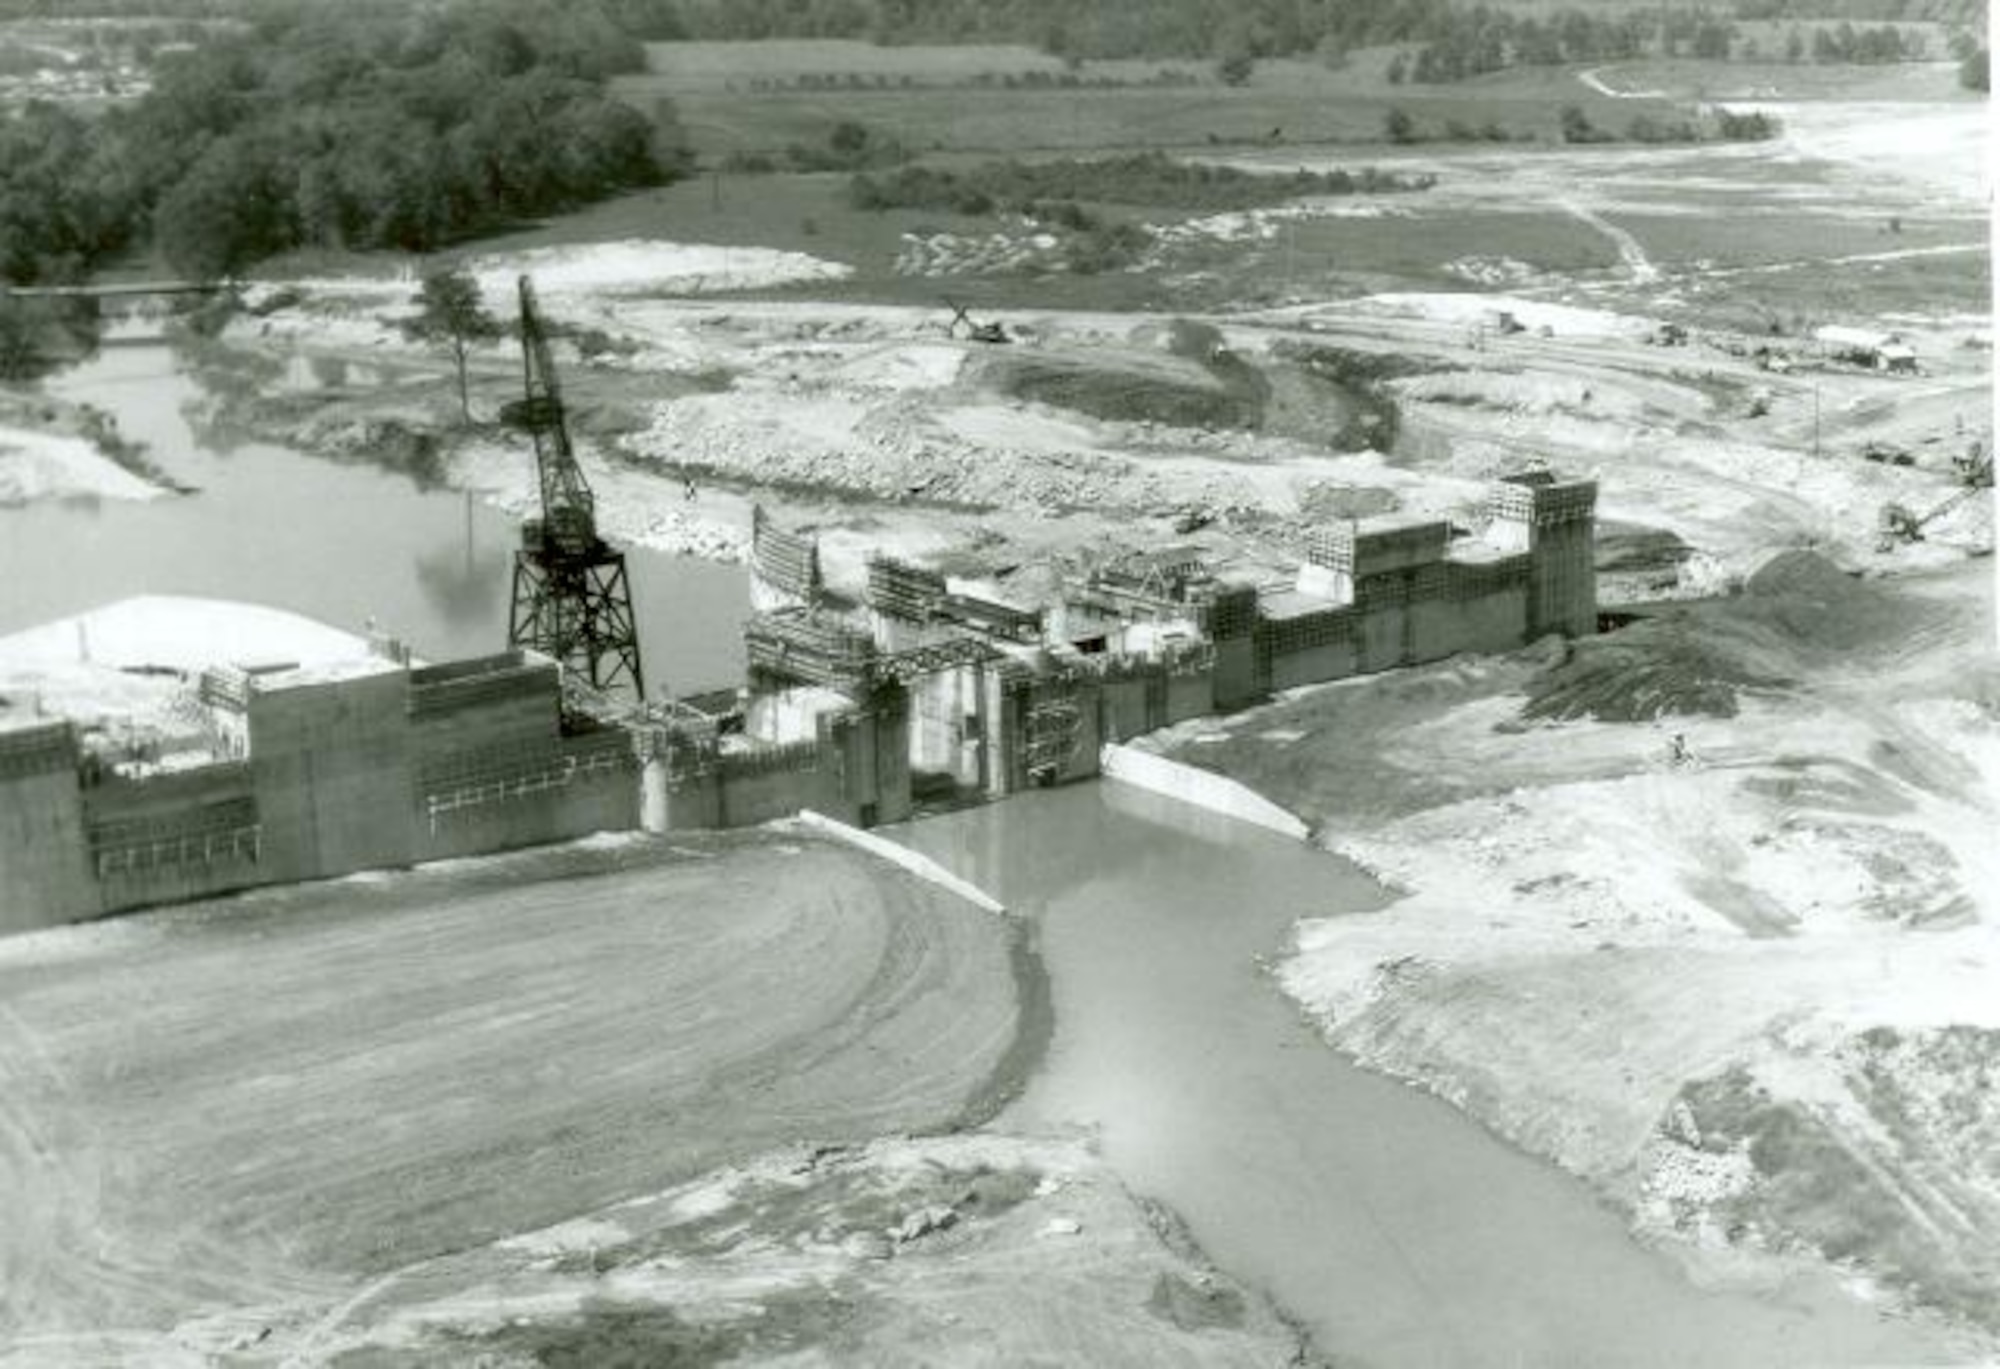 An aerial view of construction on the Elk River Dam is seen in this photo from the 1950s. The dam, constructed to create Woods Reservoir, was completed 70 years ago this month. Woods Reservoir has since supplied cooling water to the test facilities at Arnold Air Force Base, Tennessee. Arnold AFB is the headquarters of the Arnold Engineering Development Complex. (U.S. Air Force photo)